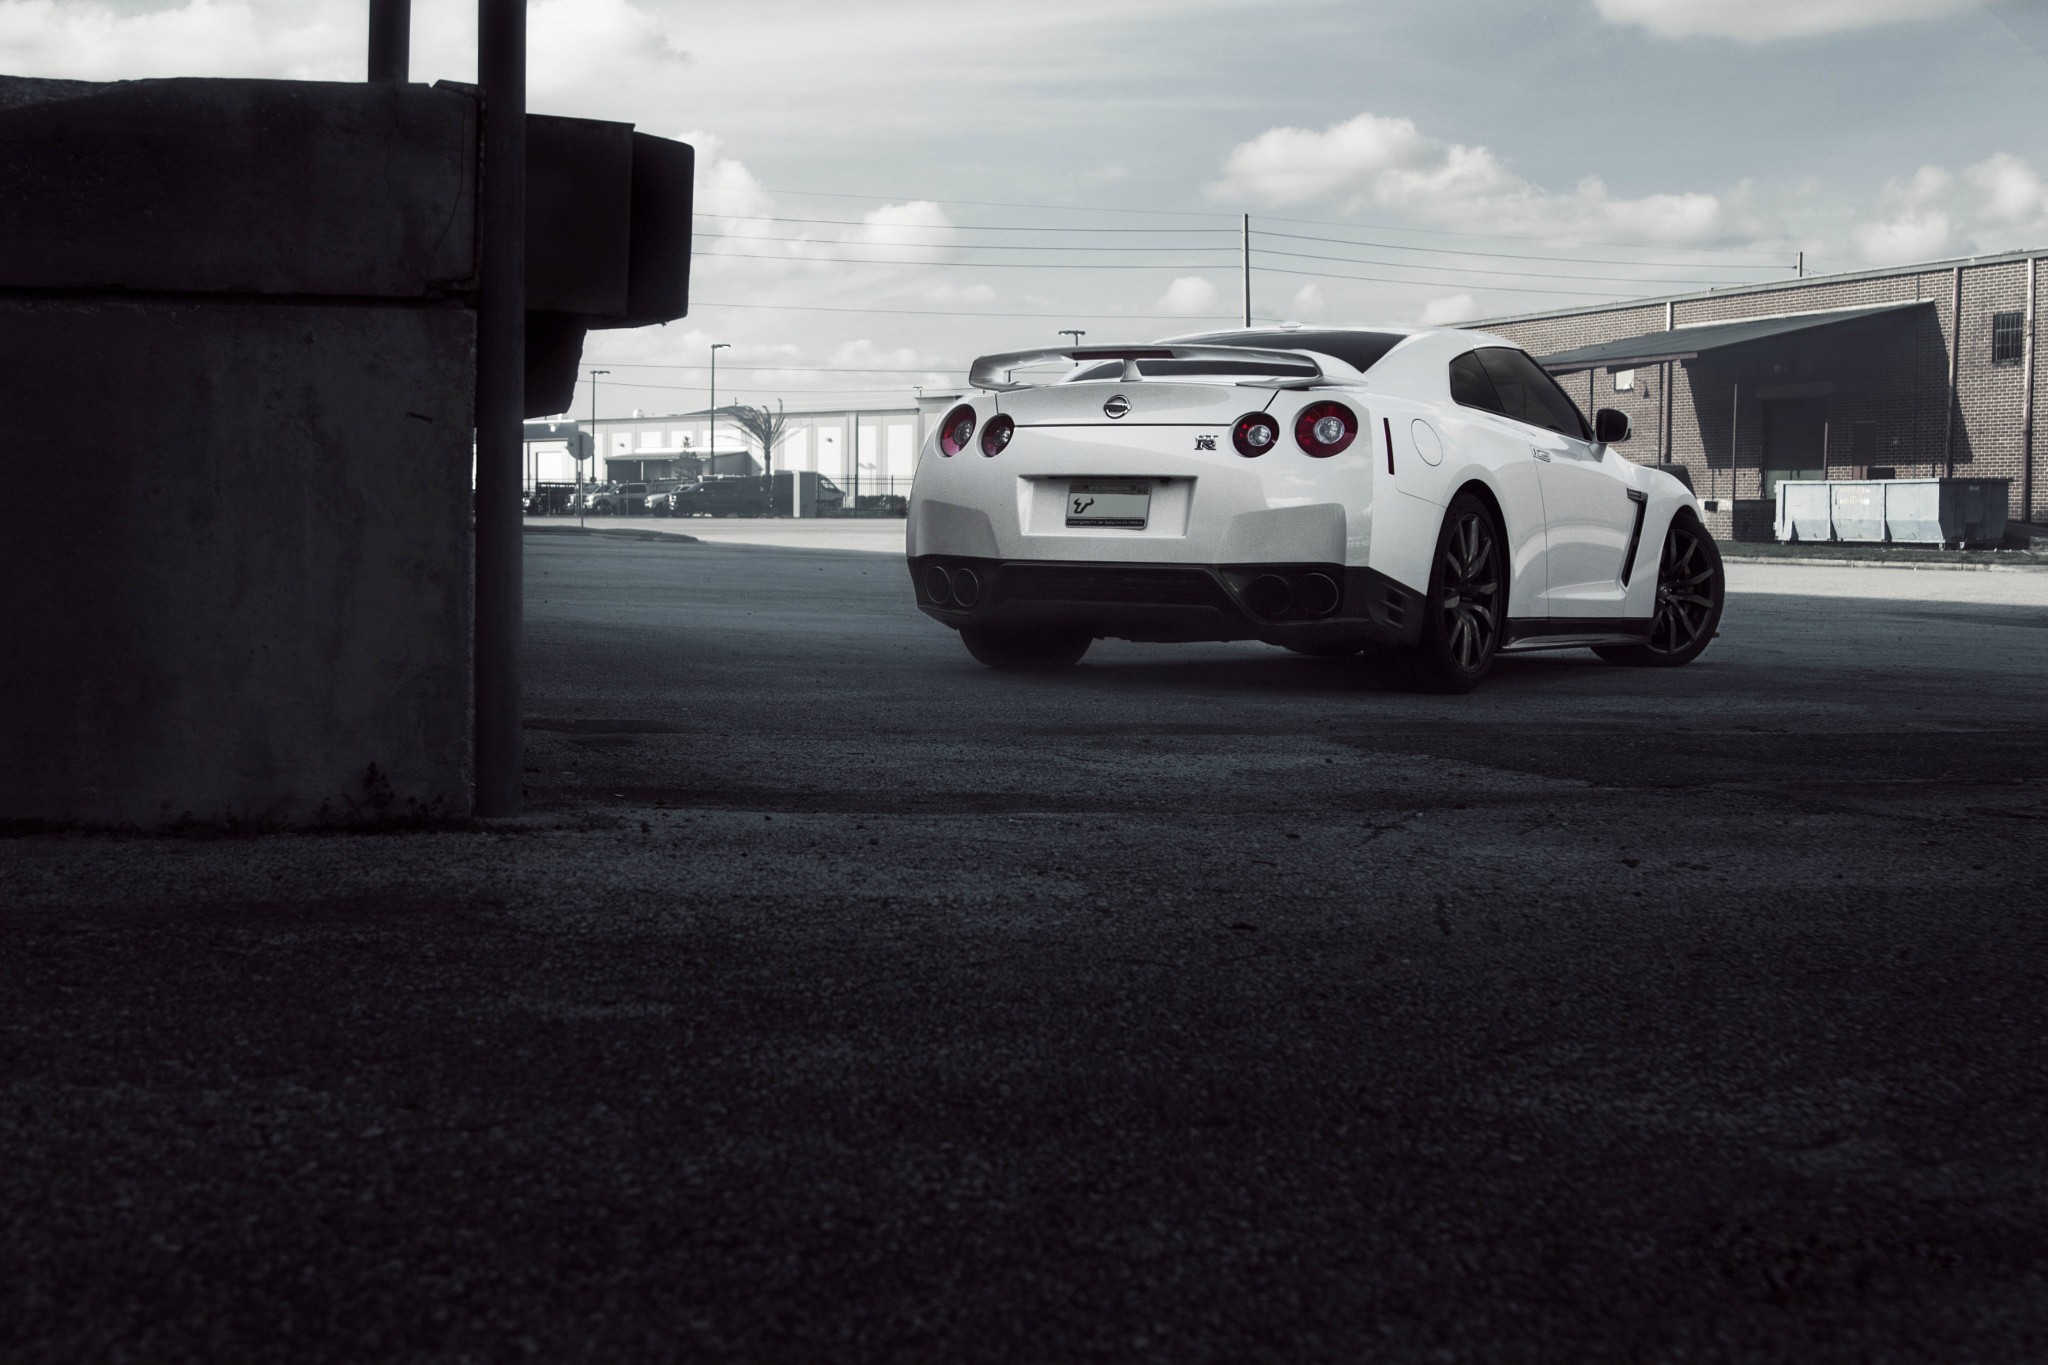 General 2048x1365 car Nissan cityscape Nissan GT-R white cars vehicle